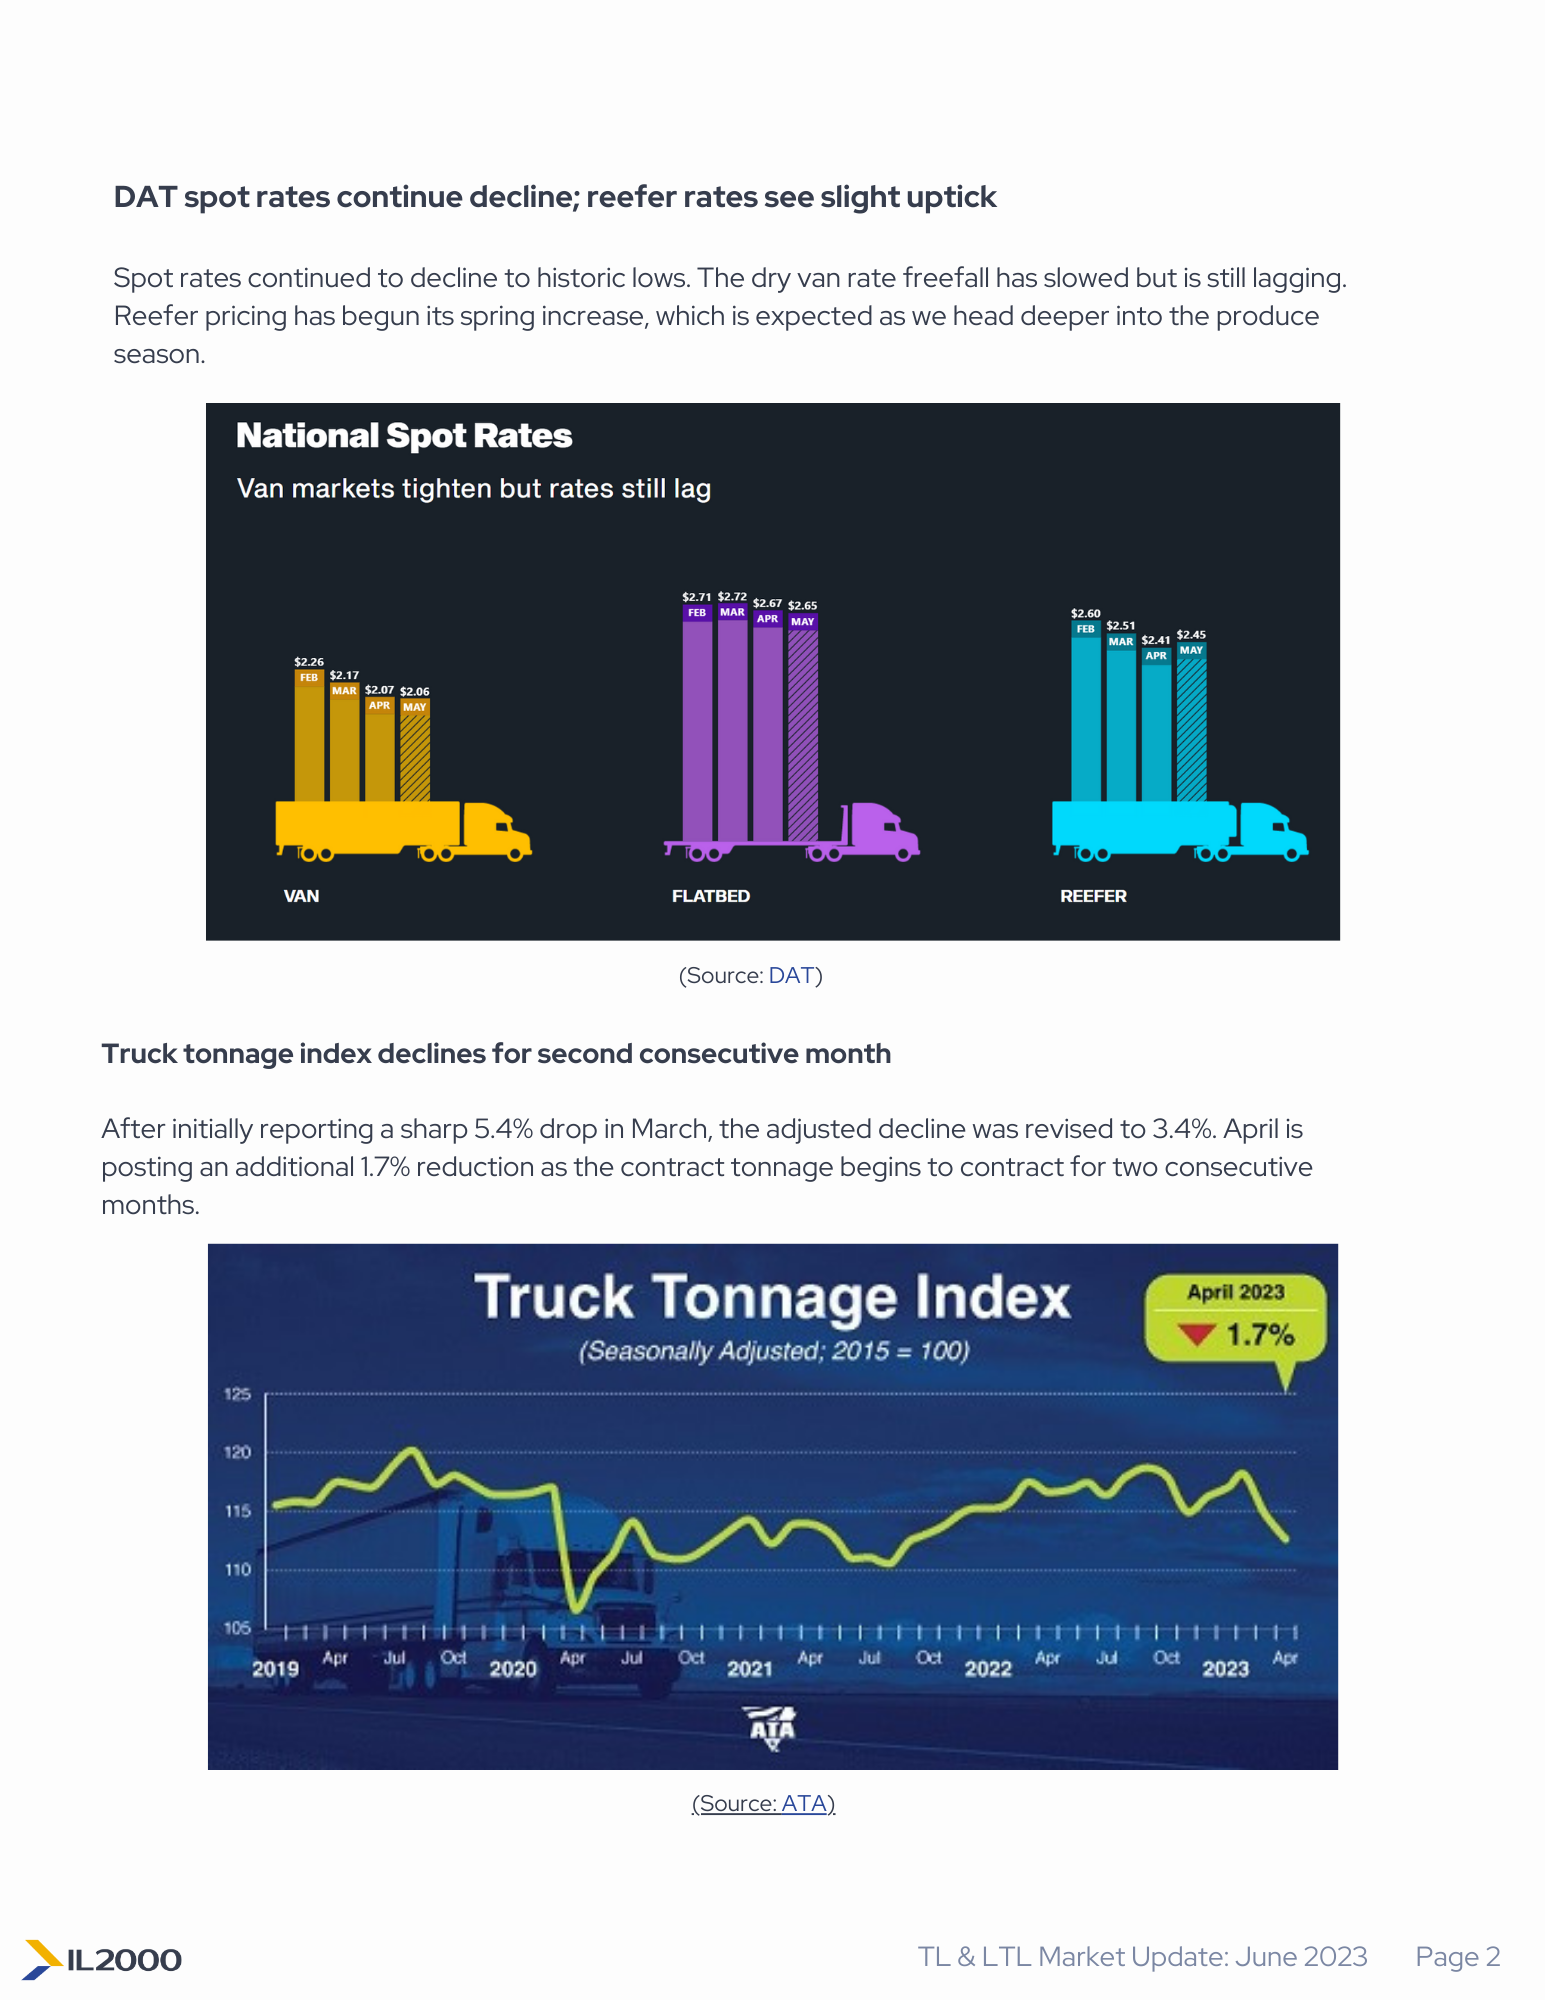 LTL and Truckload Market Update June 2023 Page 3